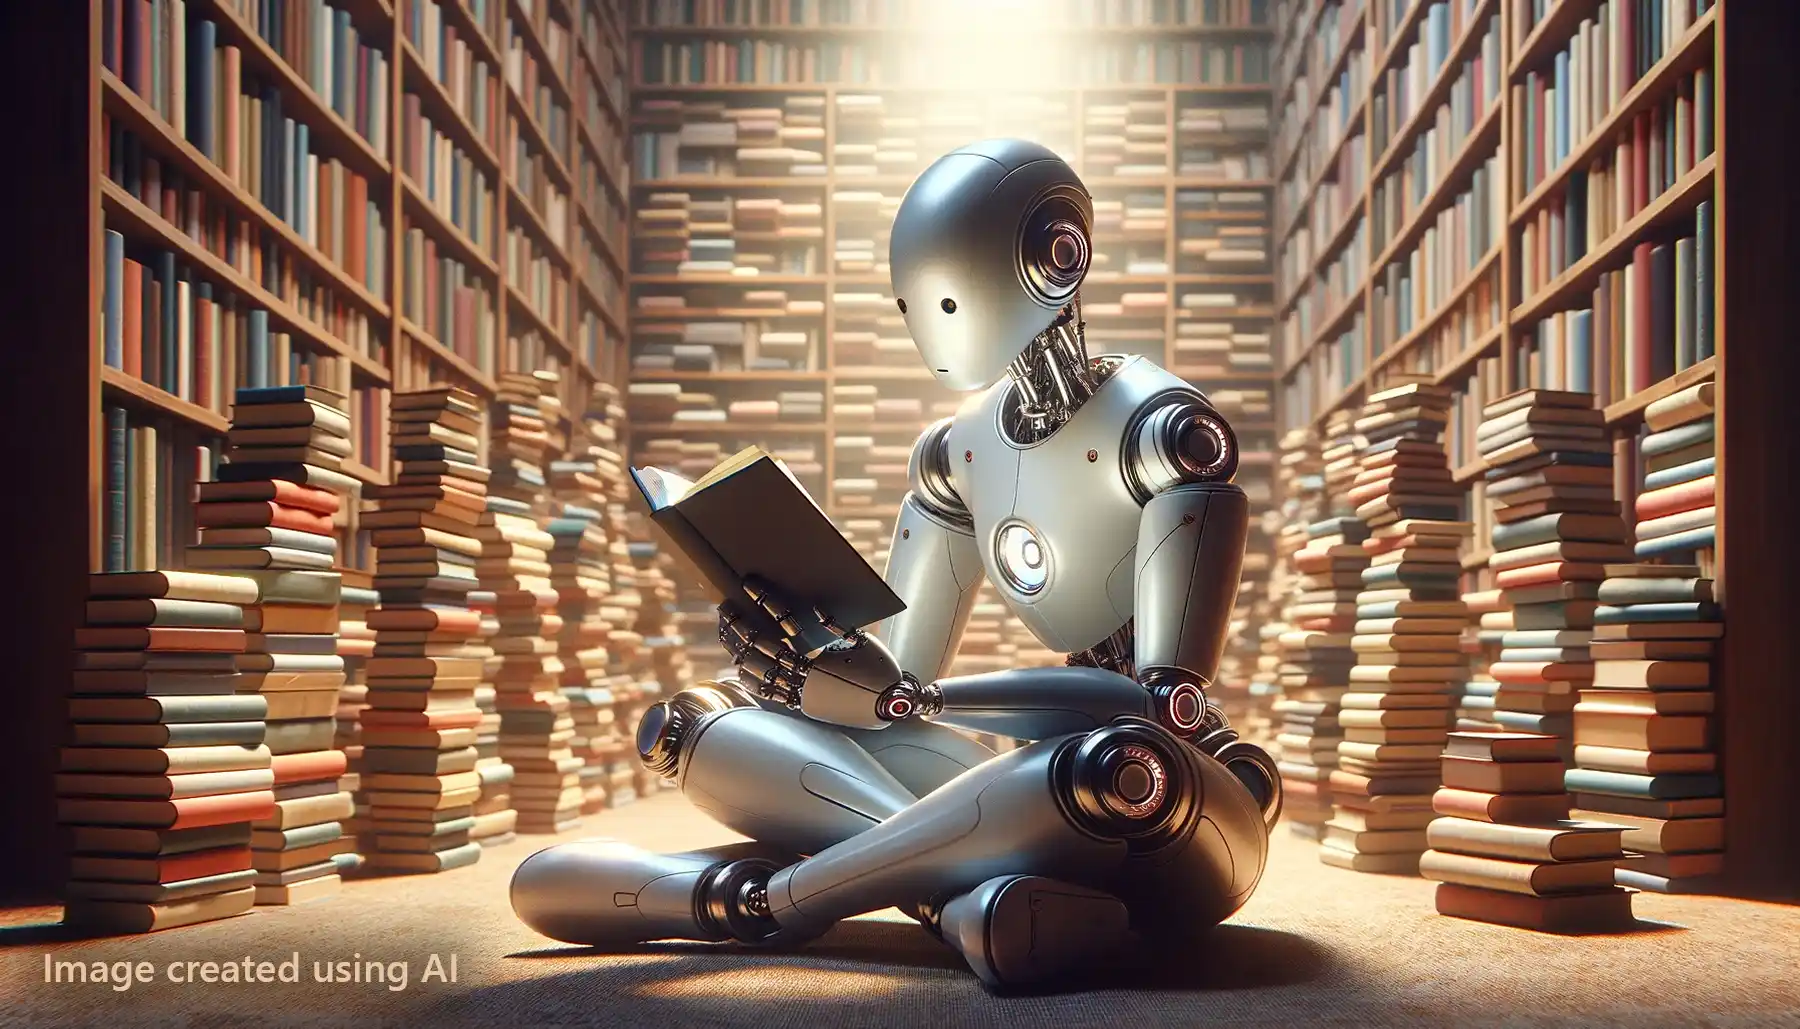 AI generated Image: A robot sits on the floor of a room in a library, reading a book.